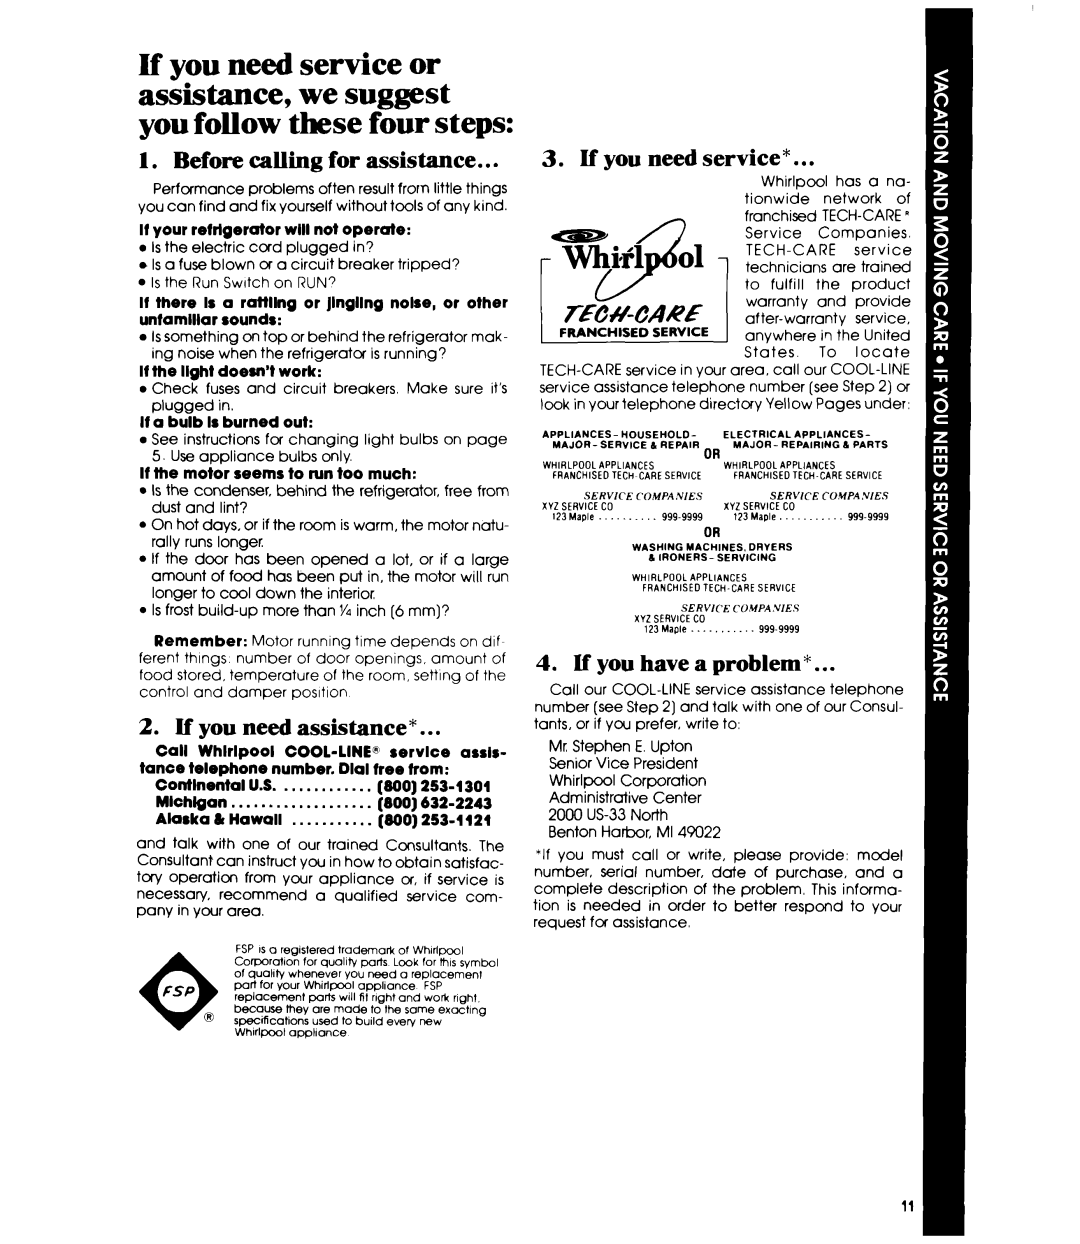 Whirlpool EL11PC manual Before calling for assistance, If you need assistance, If you need service, If you have a problem 